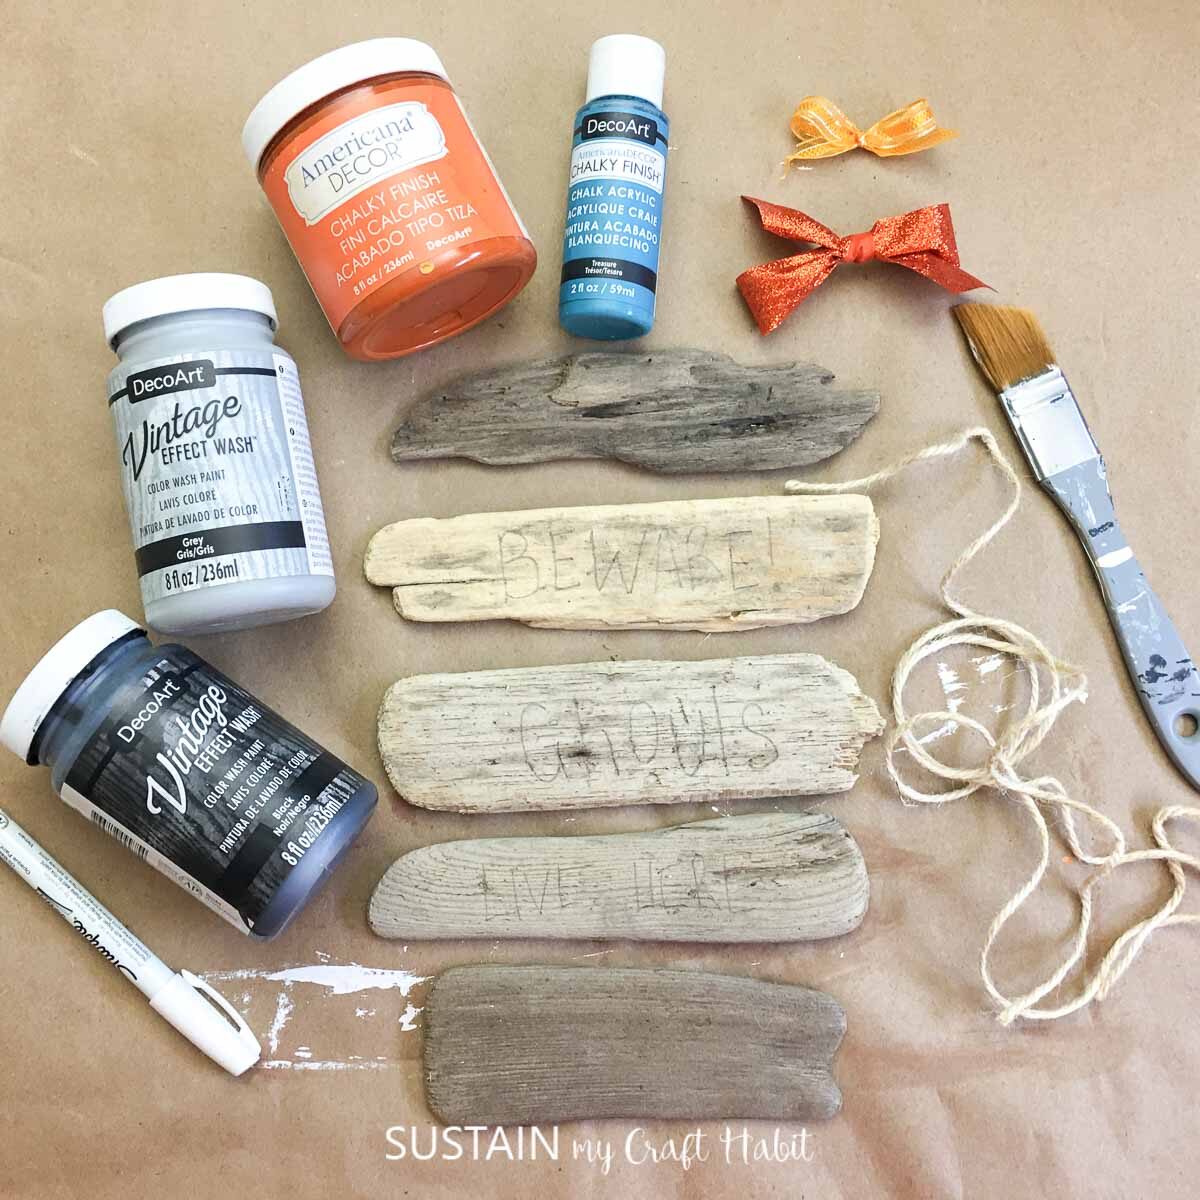 Materials needed to make a reversible driftwood wall decor for fall including driftwood, paint, paintbrush and string.